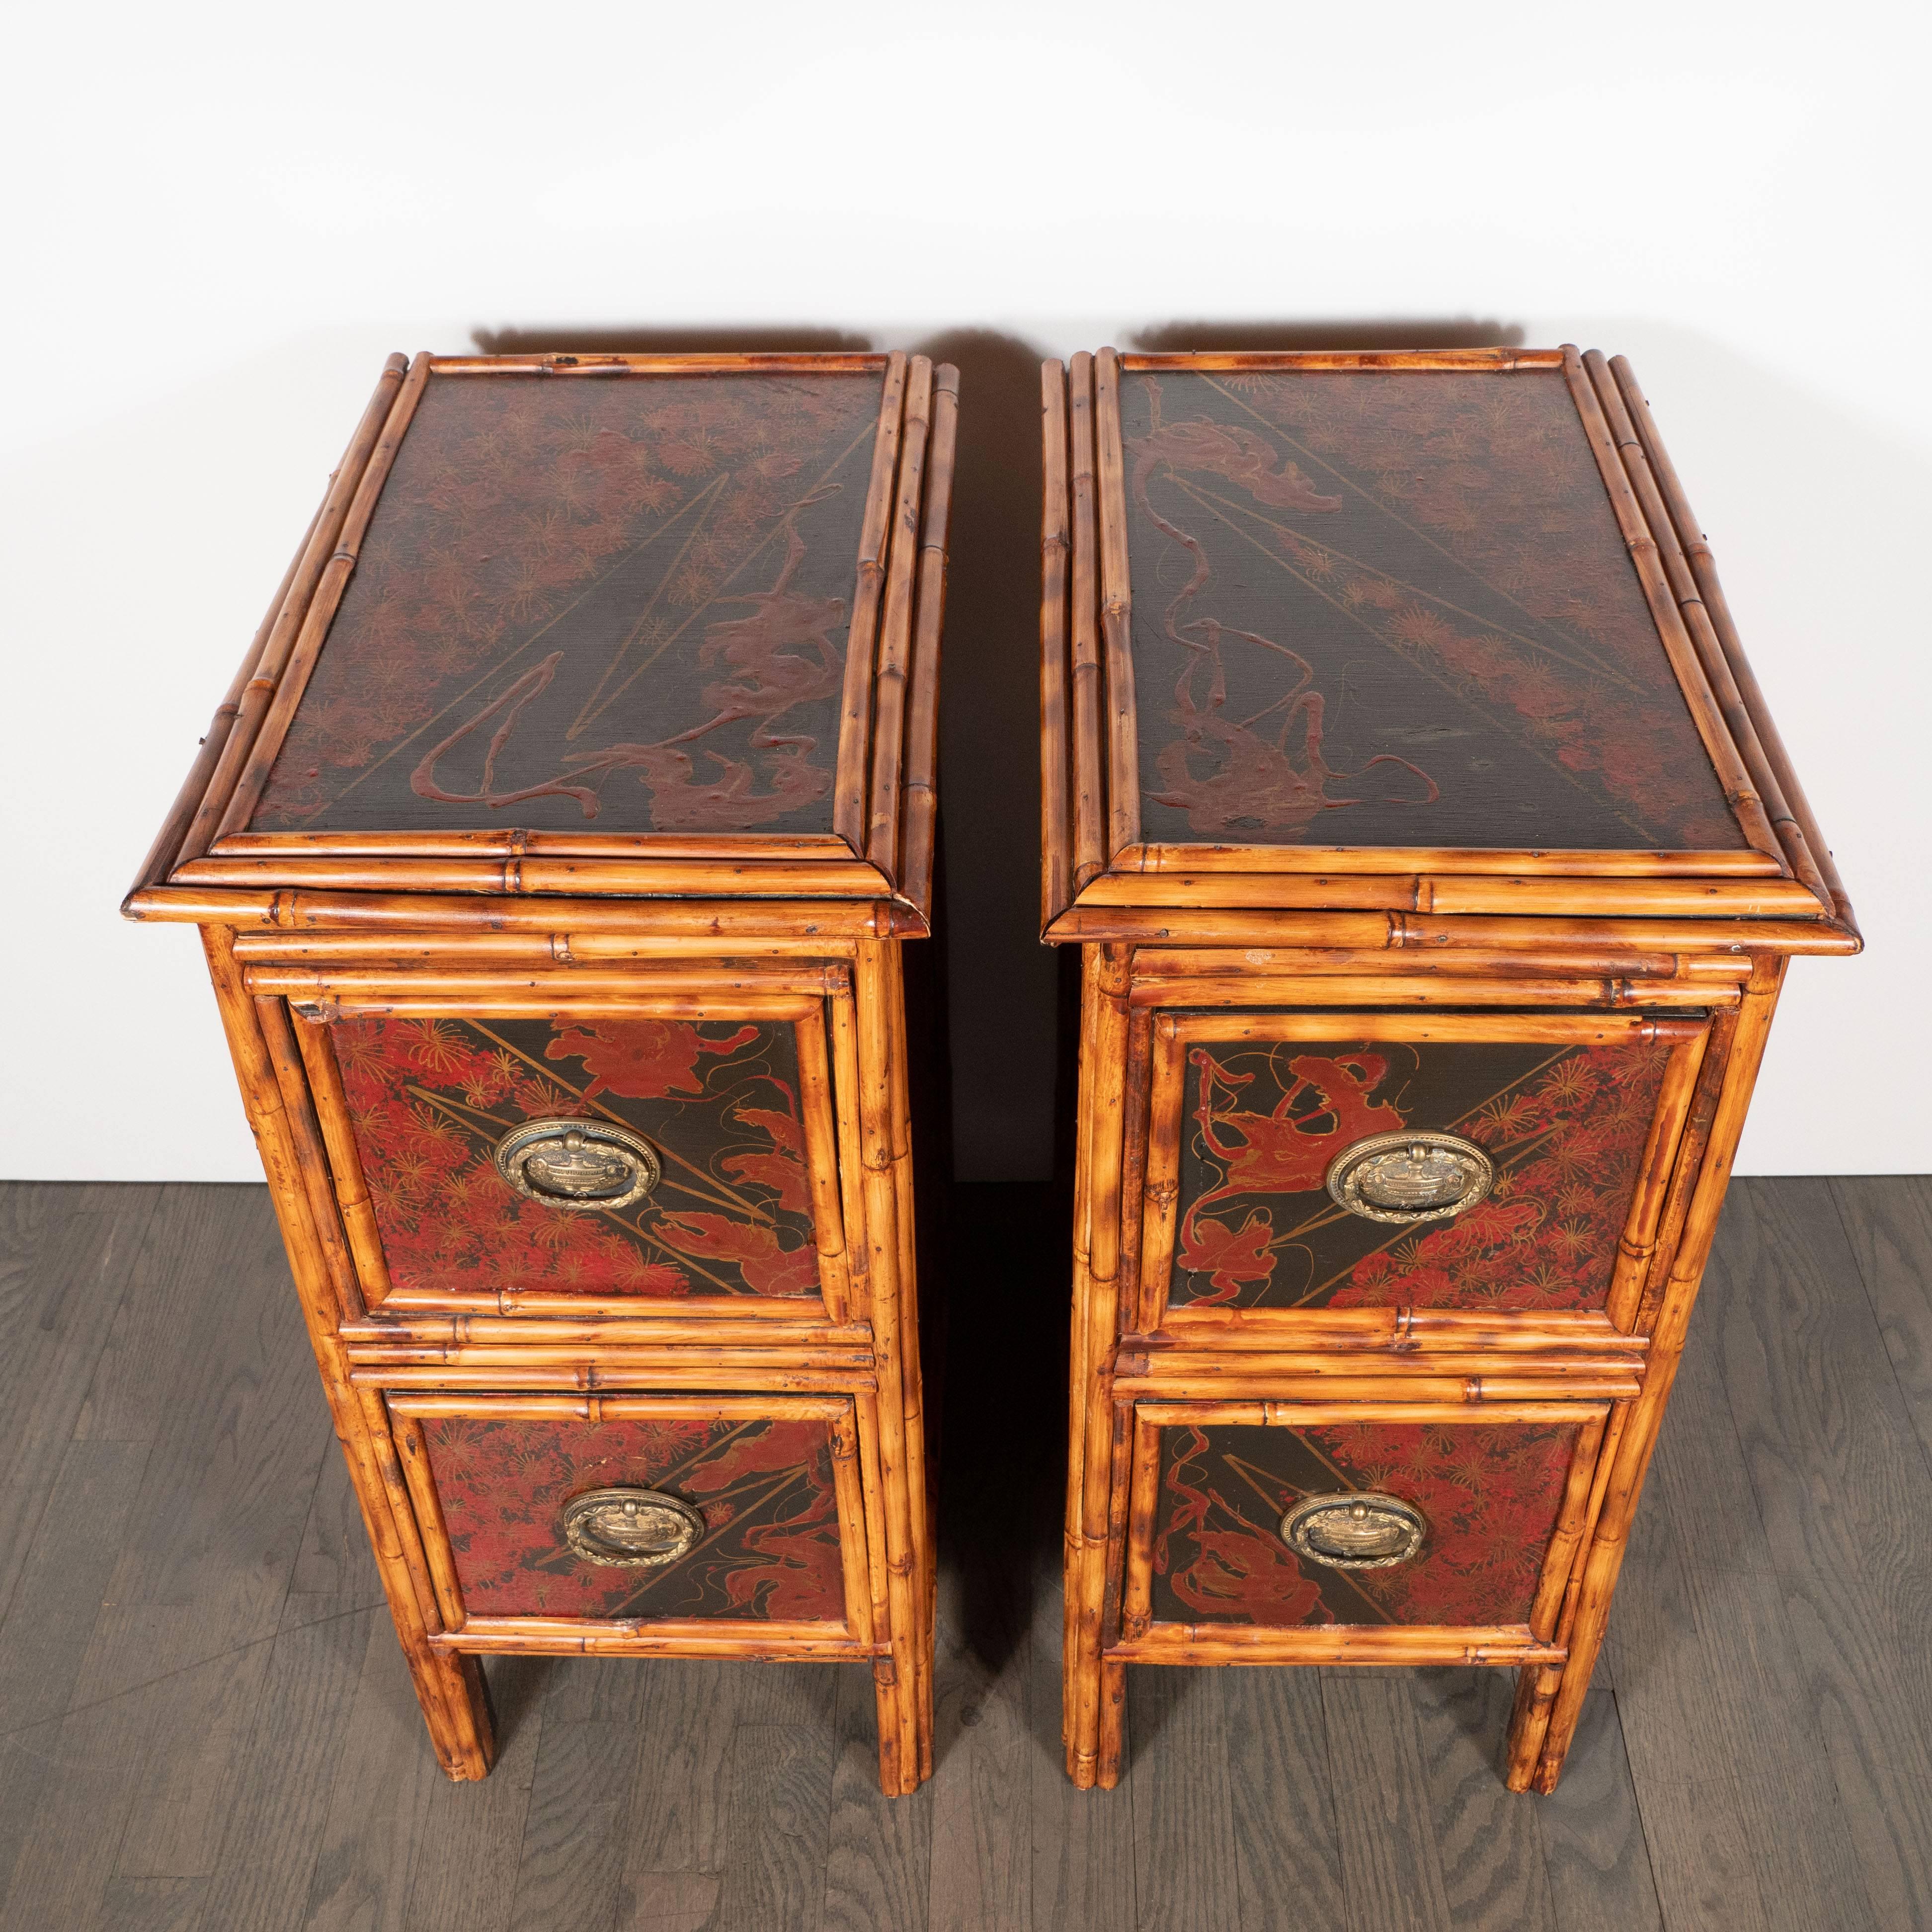 Early 20th Century Pair of Early Art Deco Hand-Painted Bamboo and Cane Nightstands